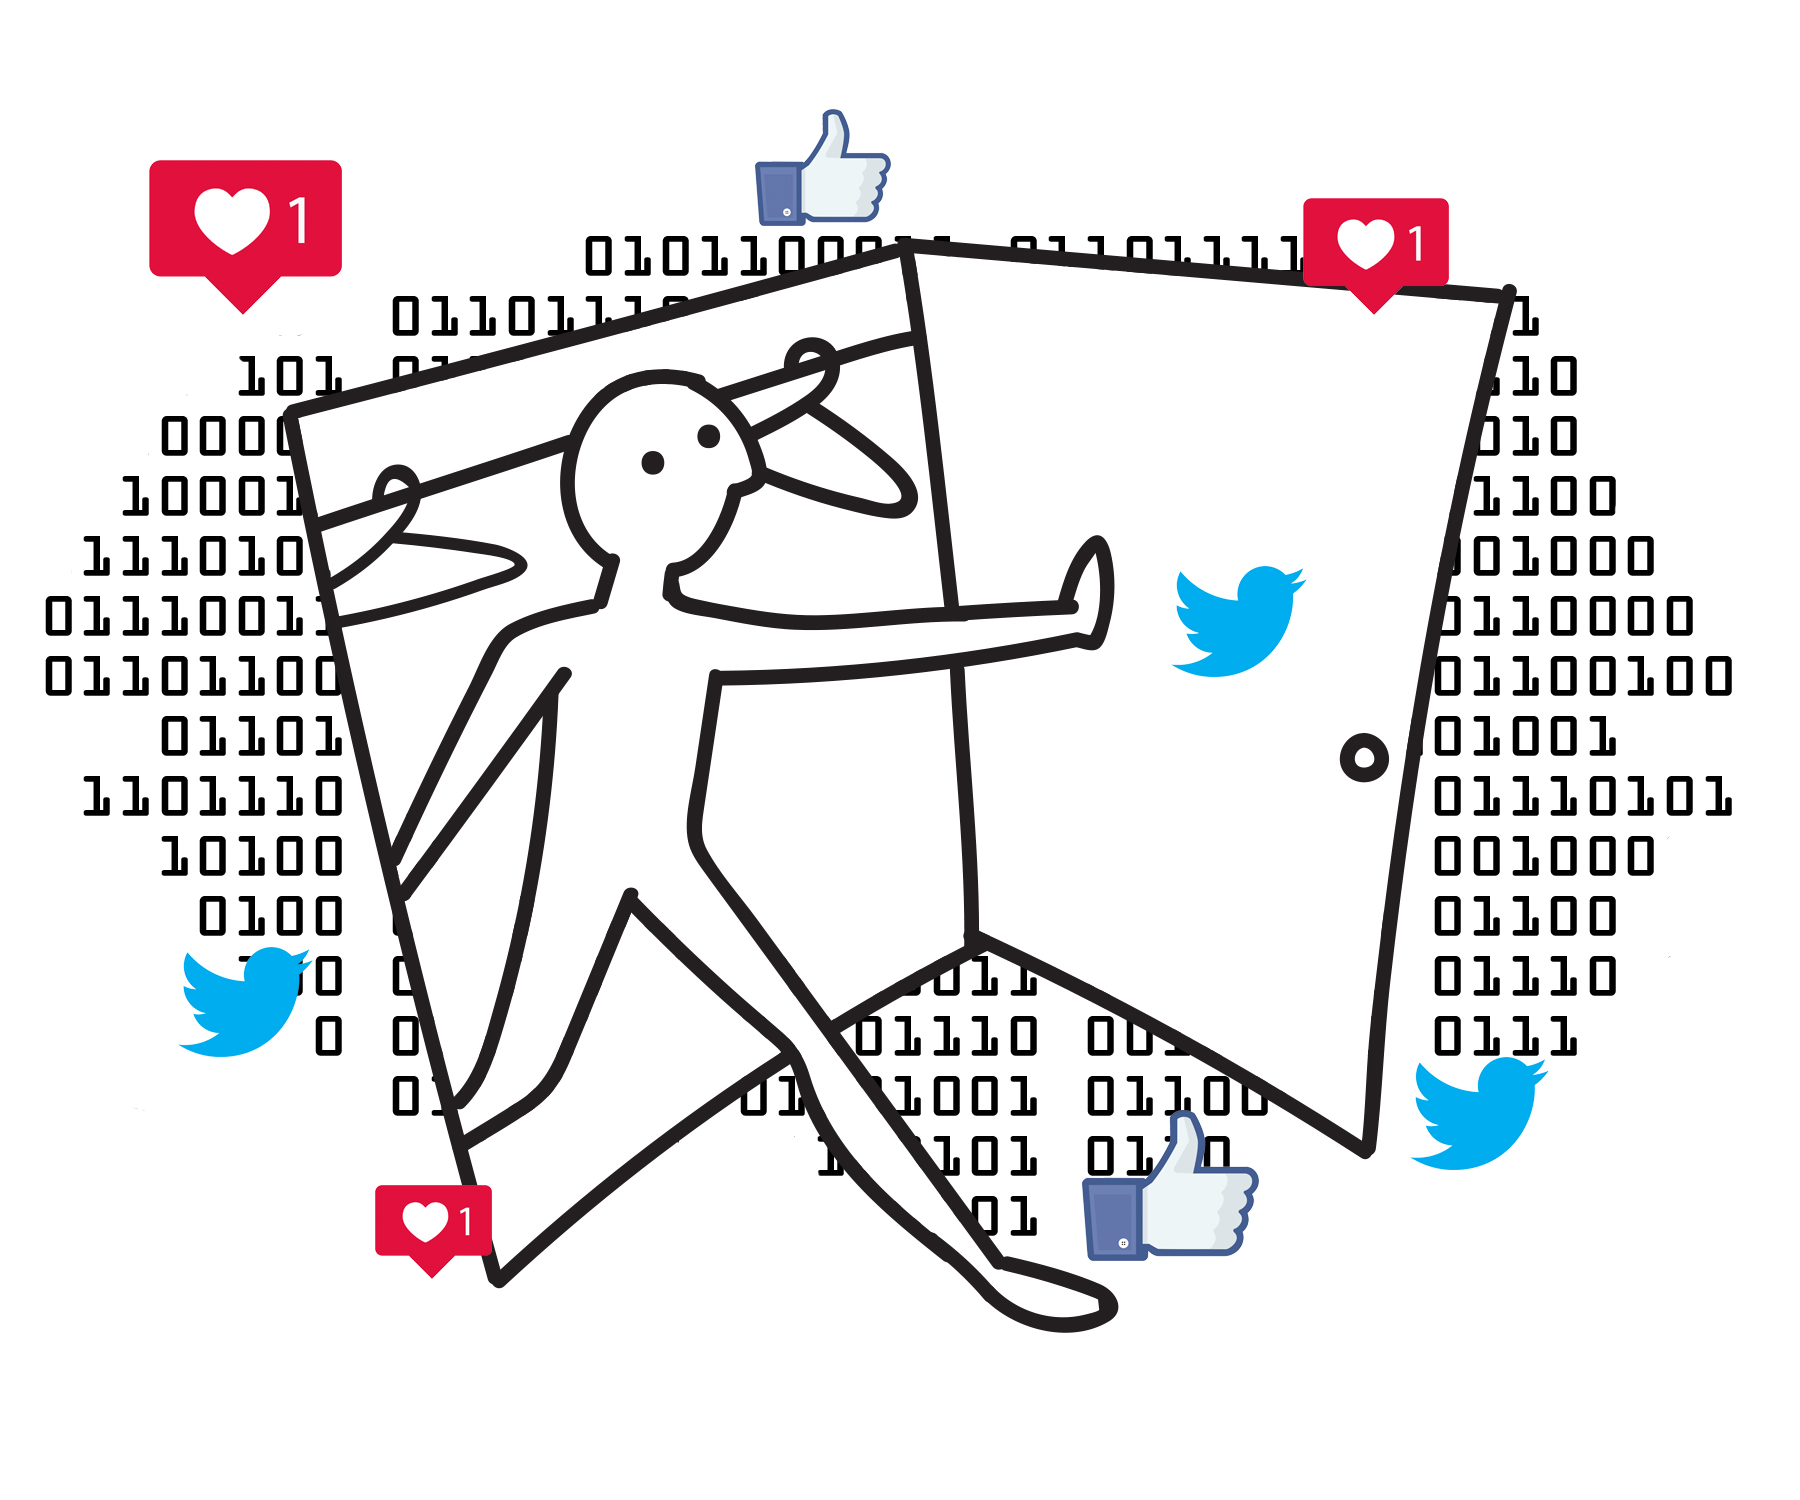 A graphic of a person coming out of the closet with a background of computer/social media imagery